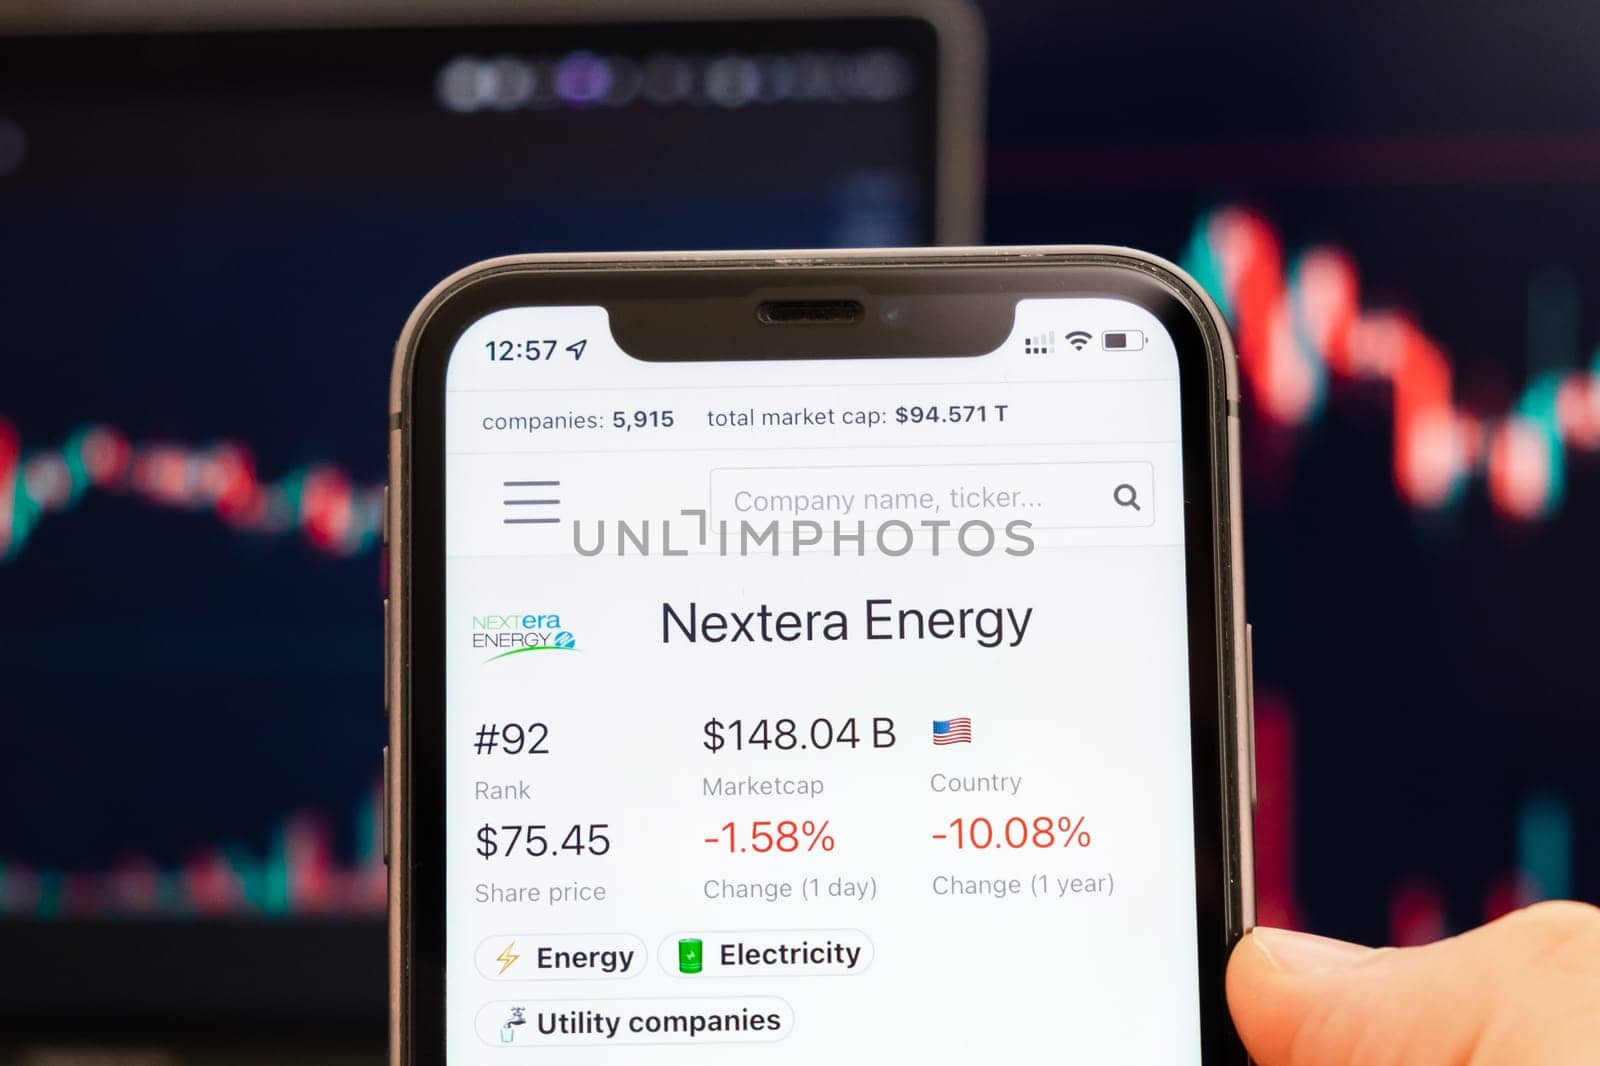 Nextera Energy stock price on the screen of cell phone in mans hand with changing stock market exchange with trading candlestick graph analysis, February 2022, San Francisco, USA